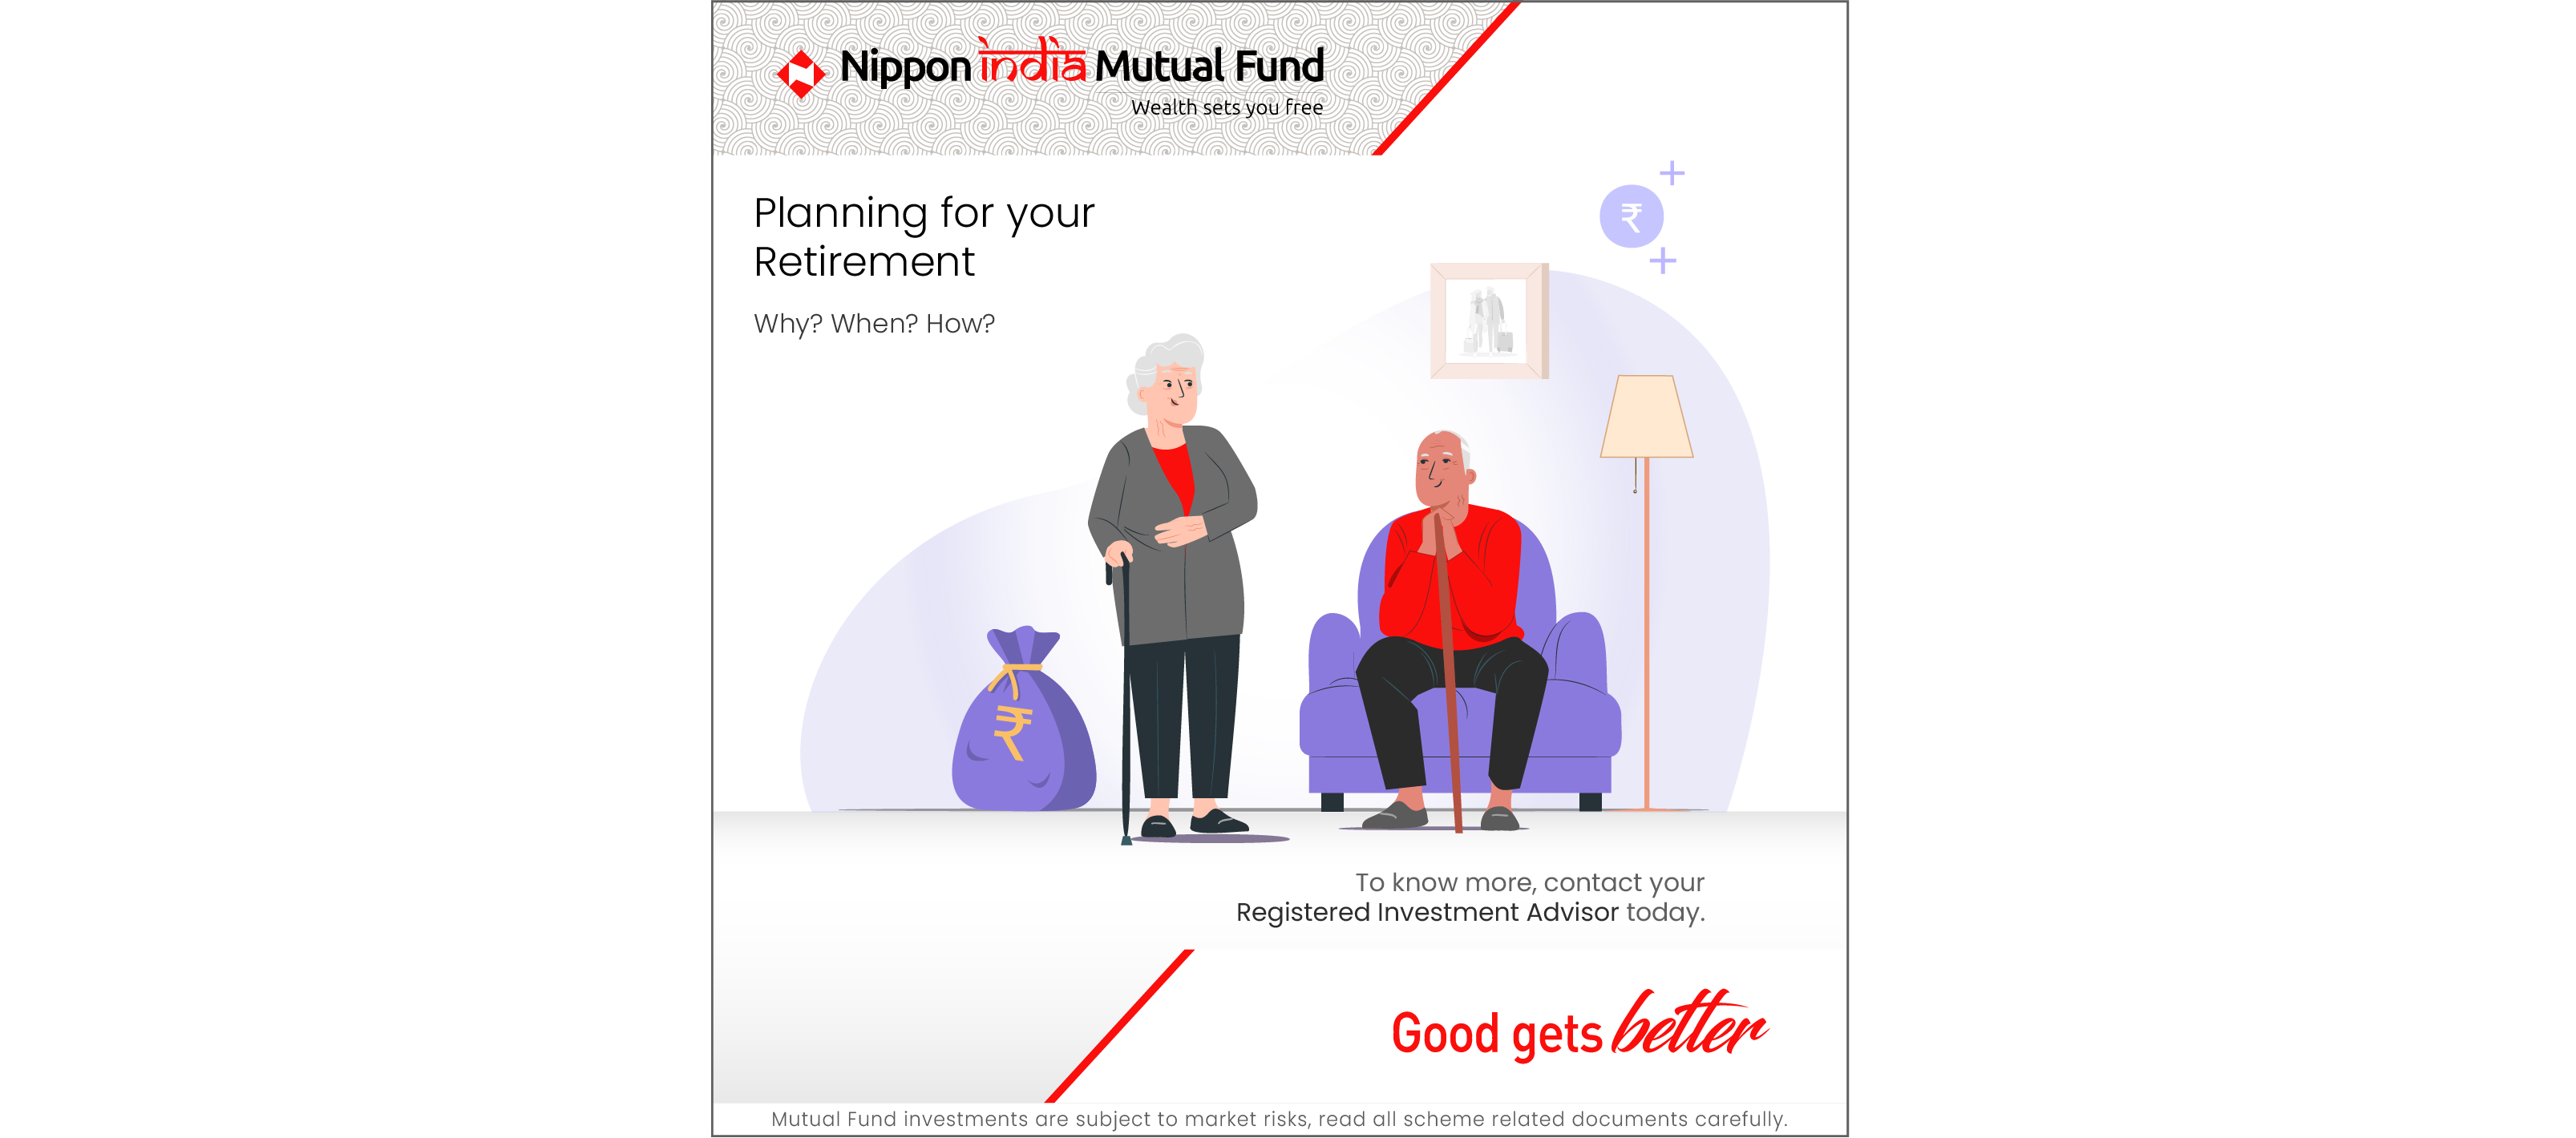 Planning-for-your-retirement